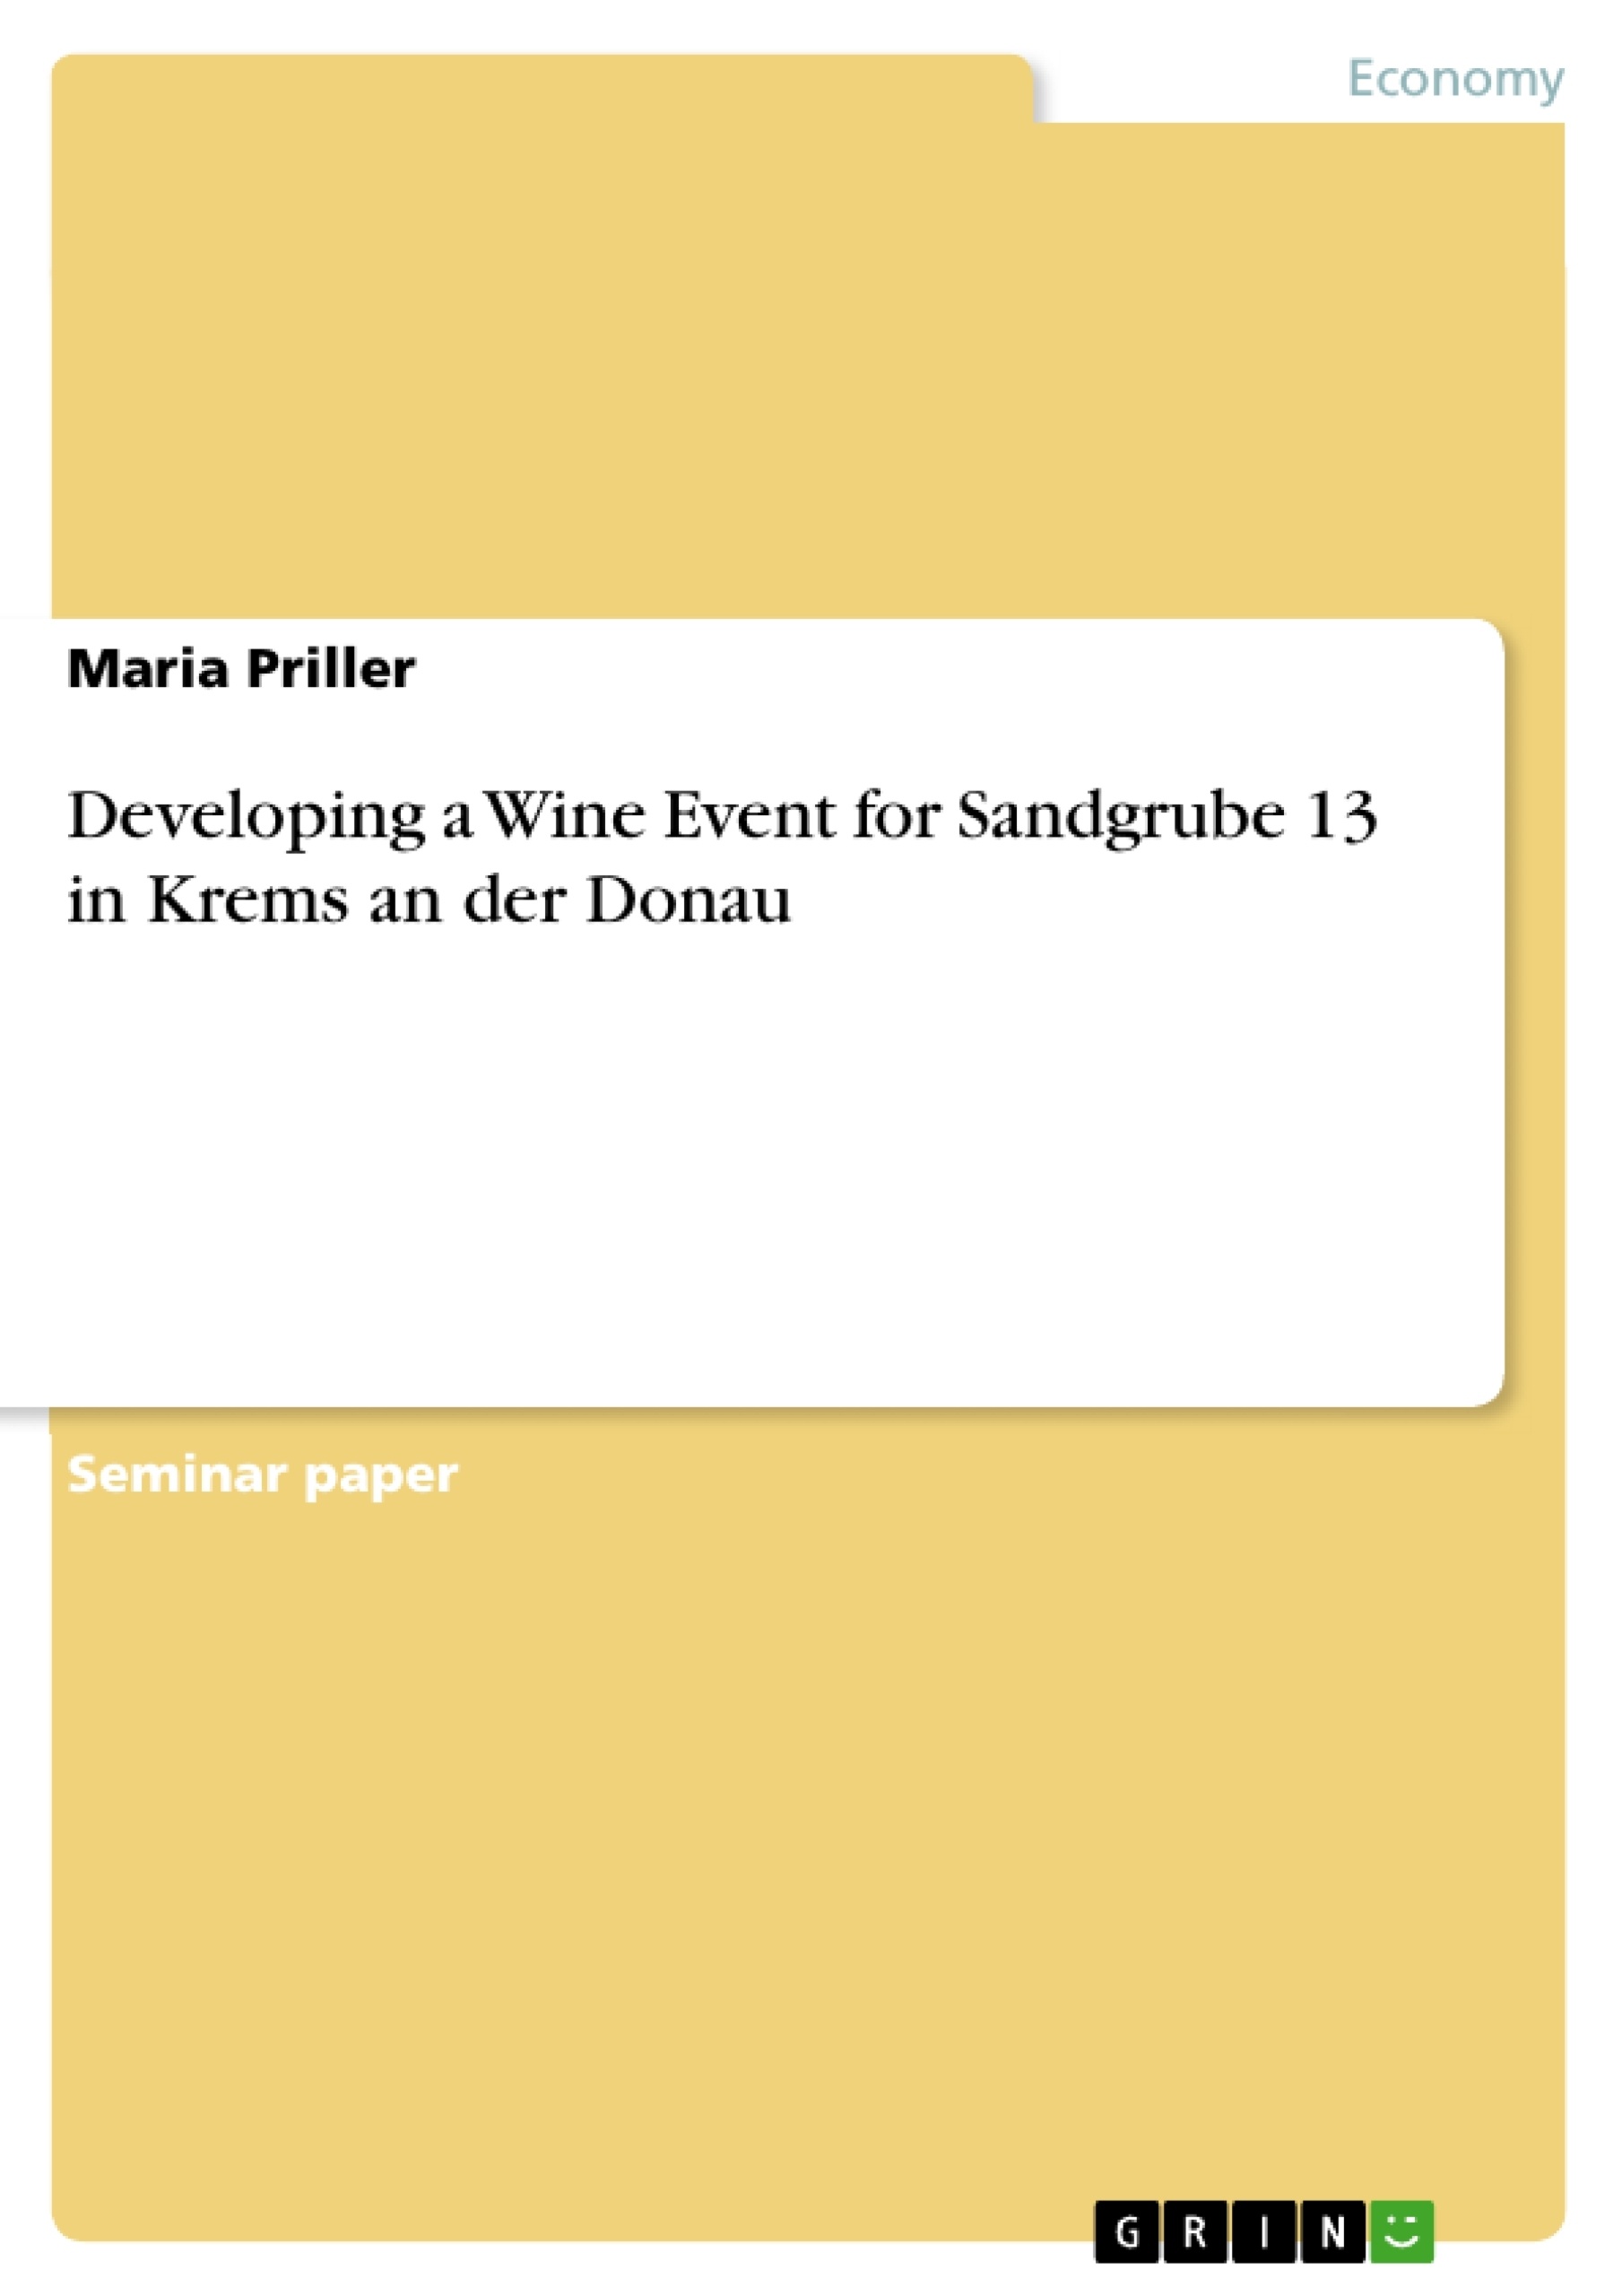 Título: Developing a Wine Event for Sandgrube 13 in Krems an der Donau